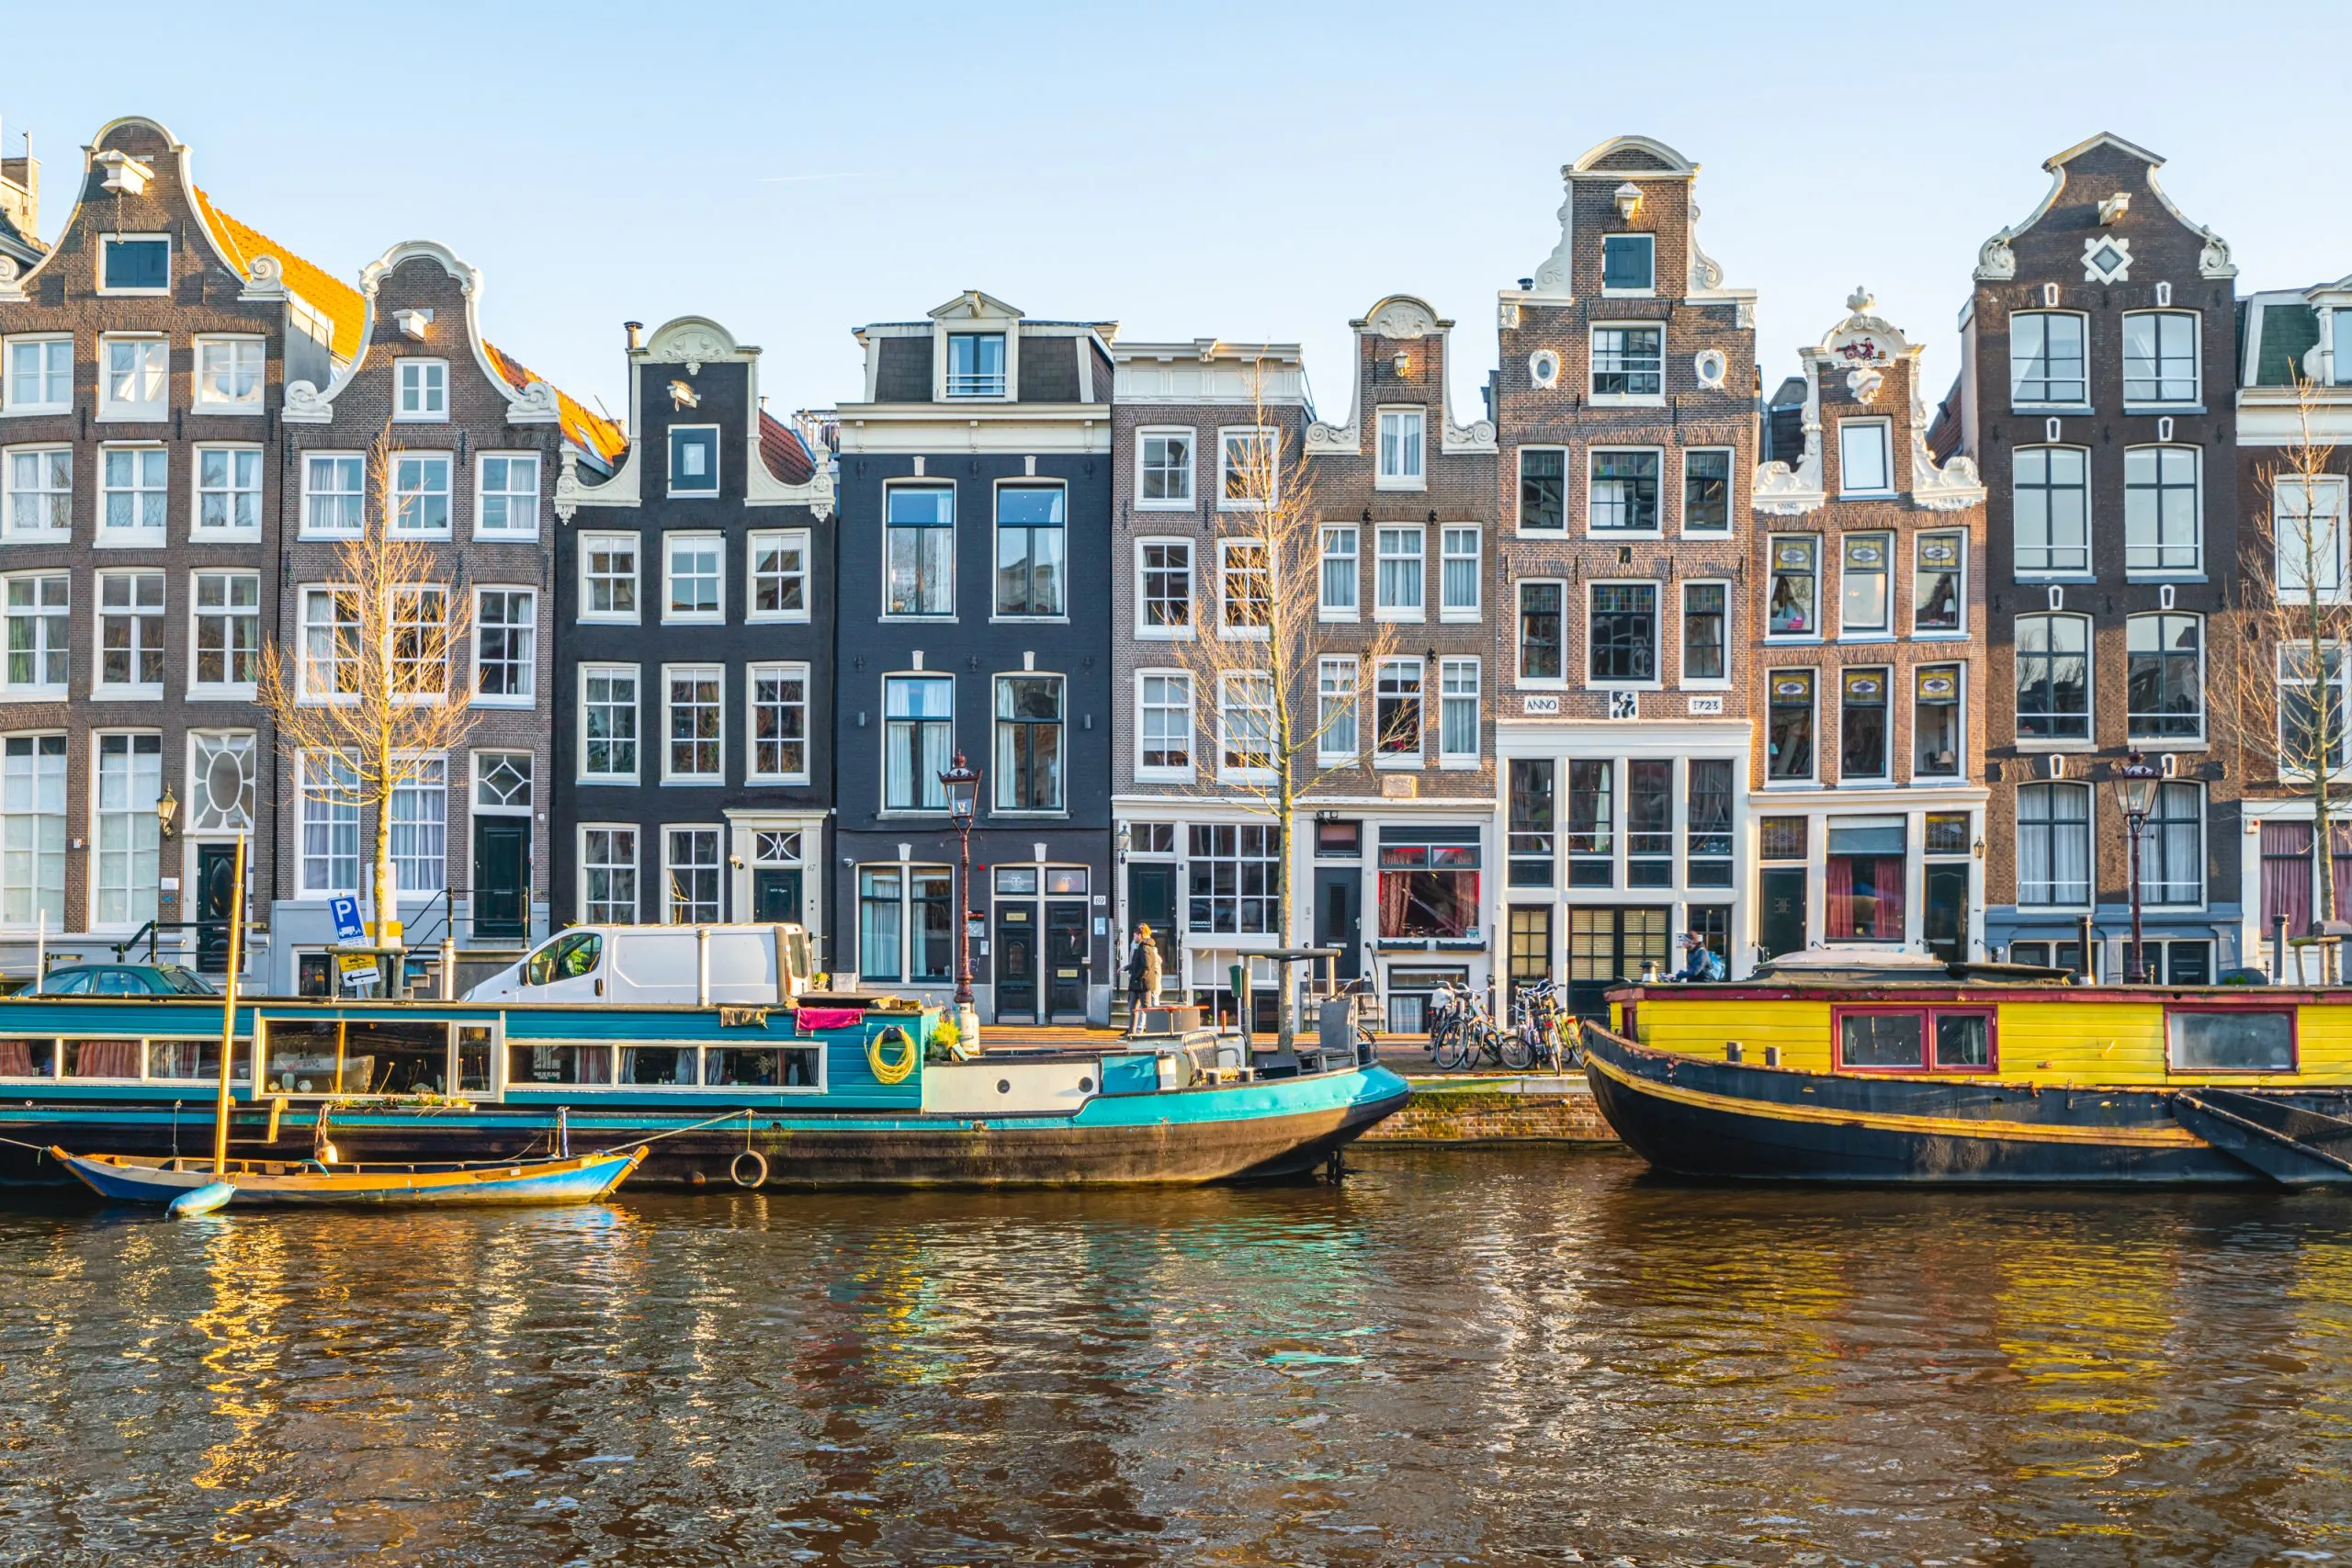 One Day in Amsterdam: How to Enjoy Amsterdam in a Day